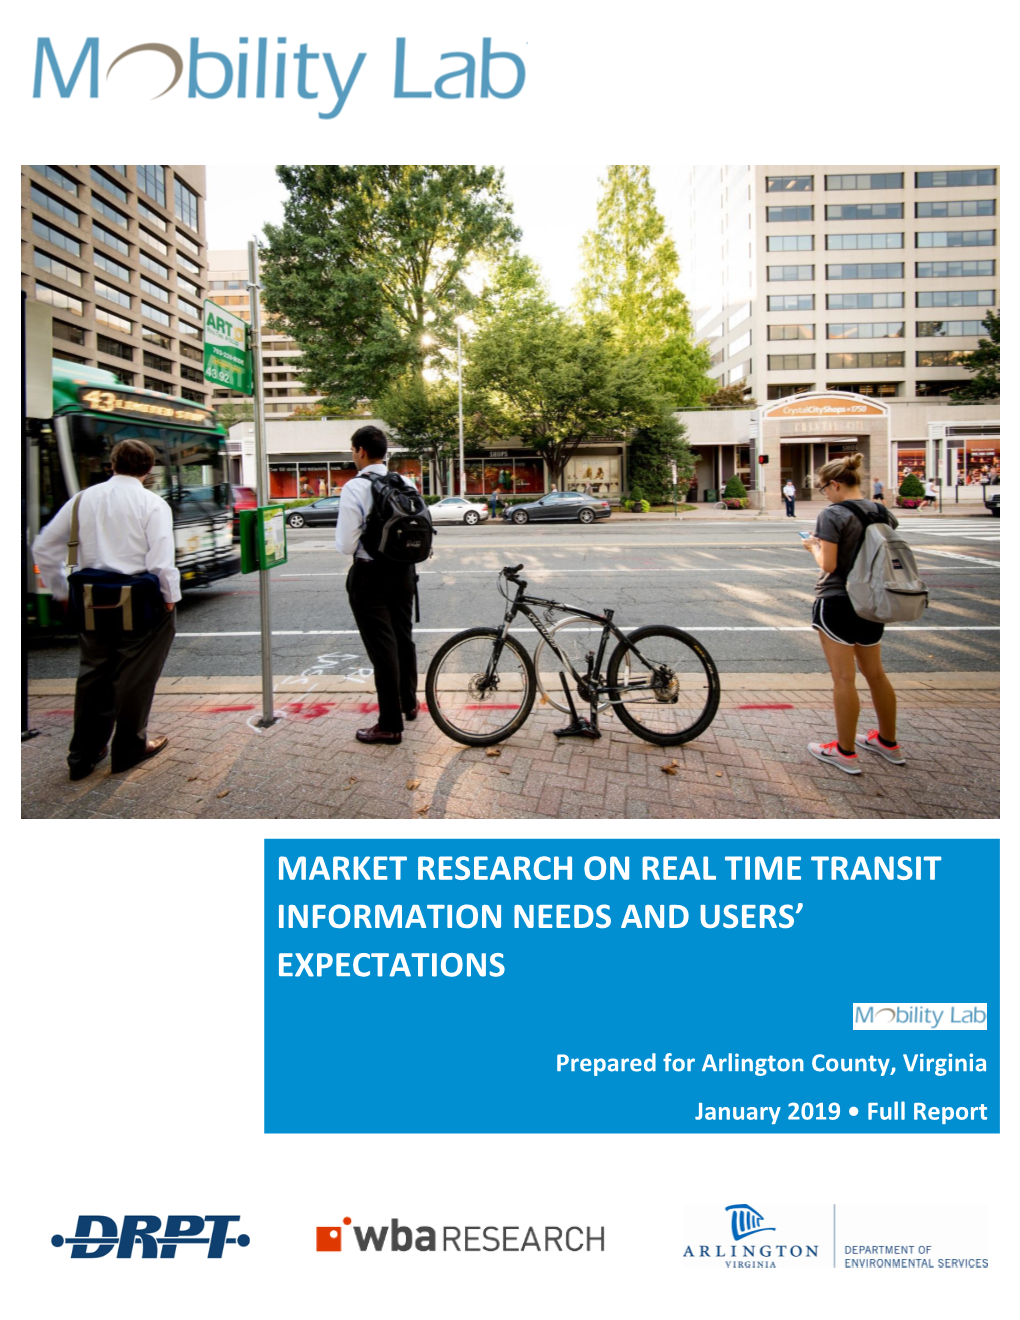 Market Research on Real Time Transit Information Needs and Users